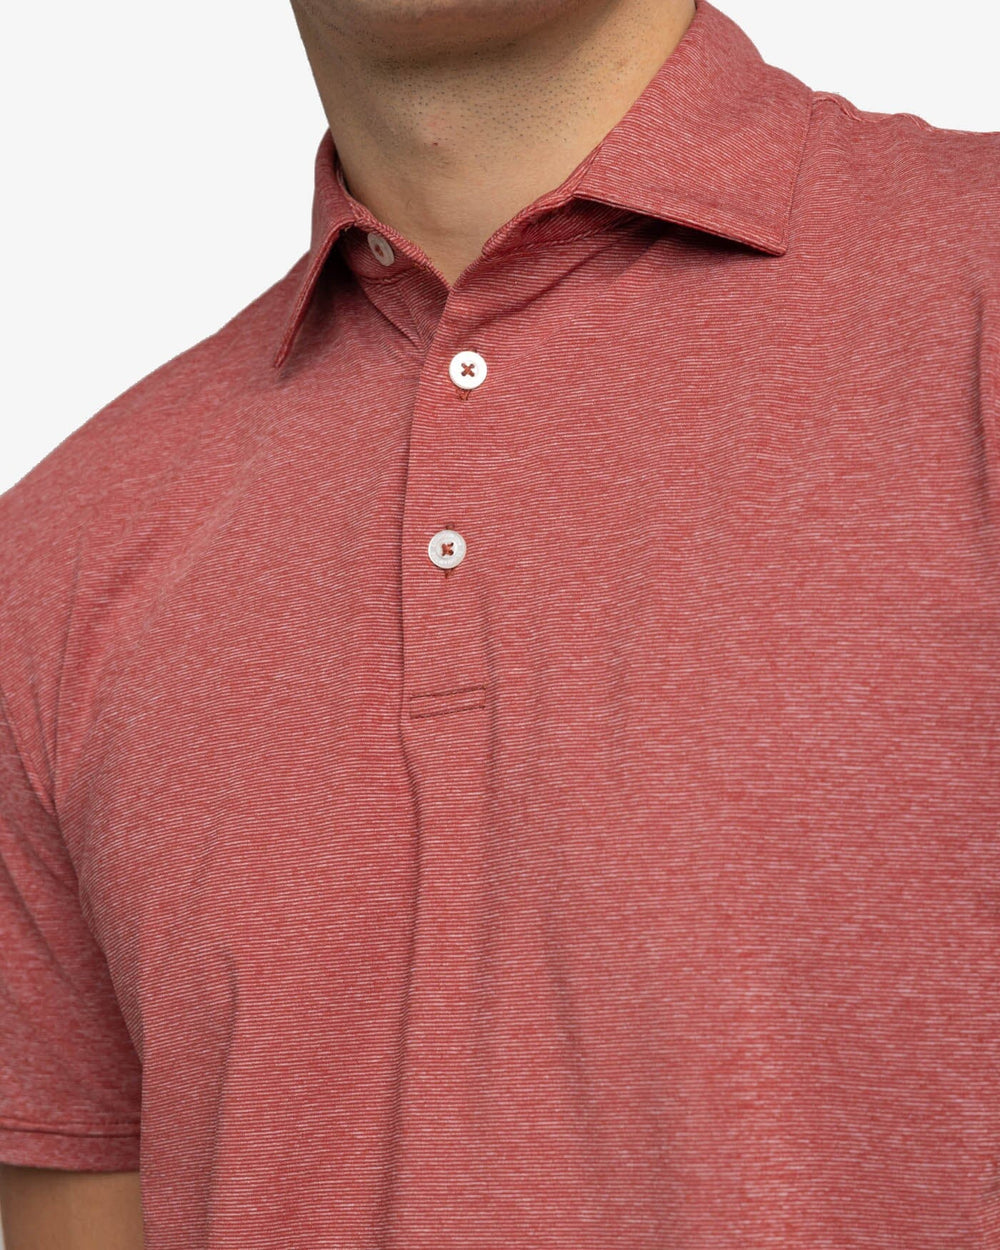 The detail view of the Southern Tide brrr-eeze Heather Performance Polo Shirt by Southern Tide - Heather Tuscany Red